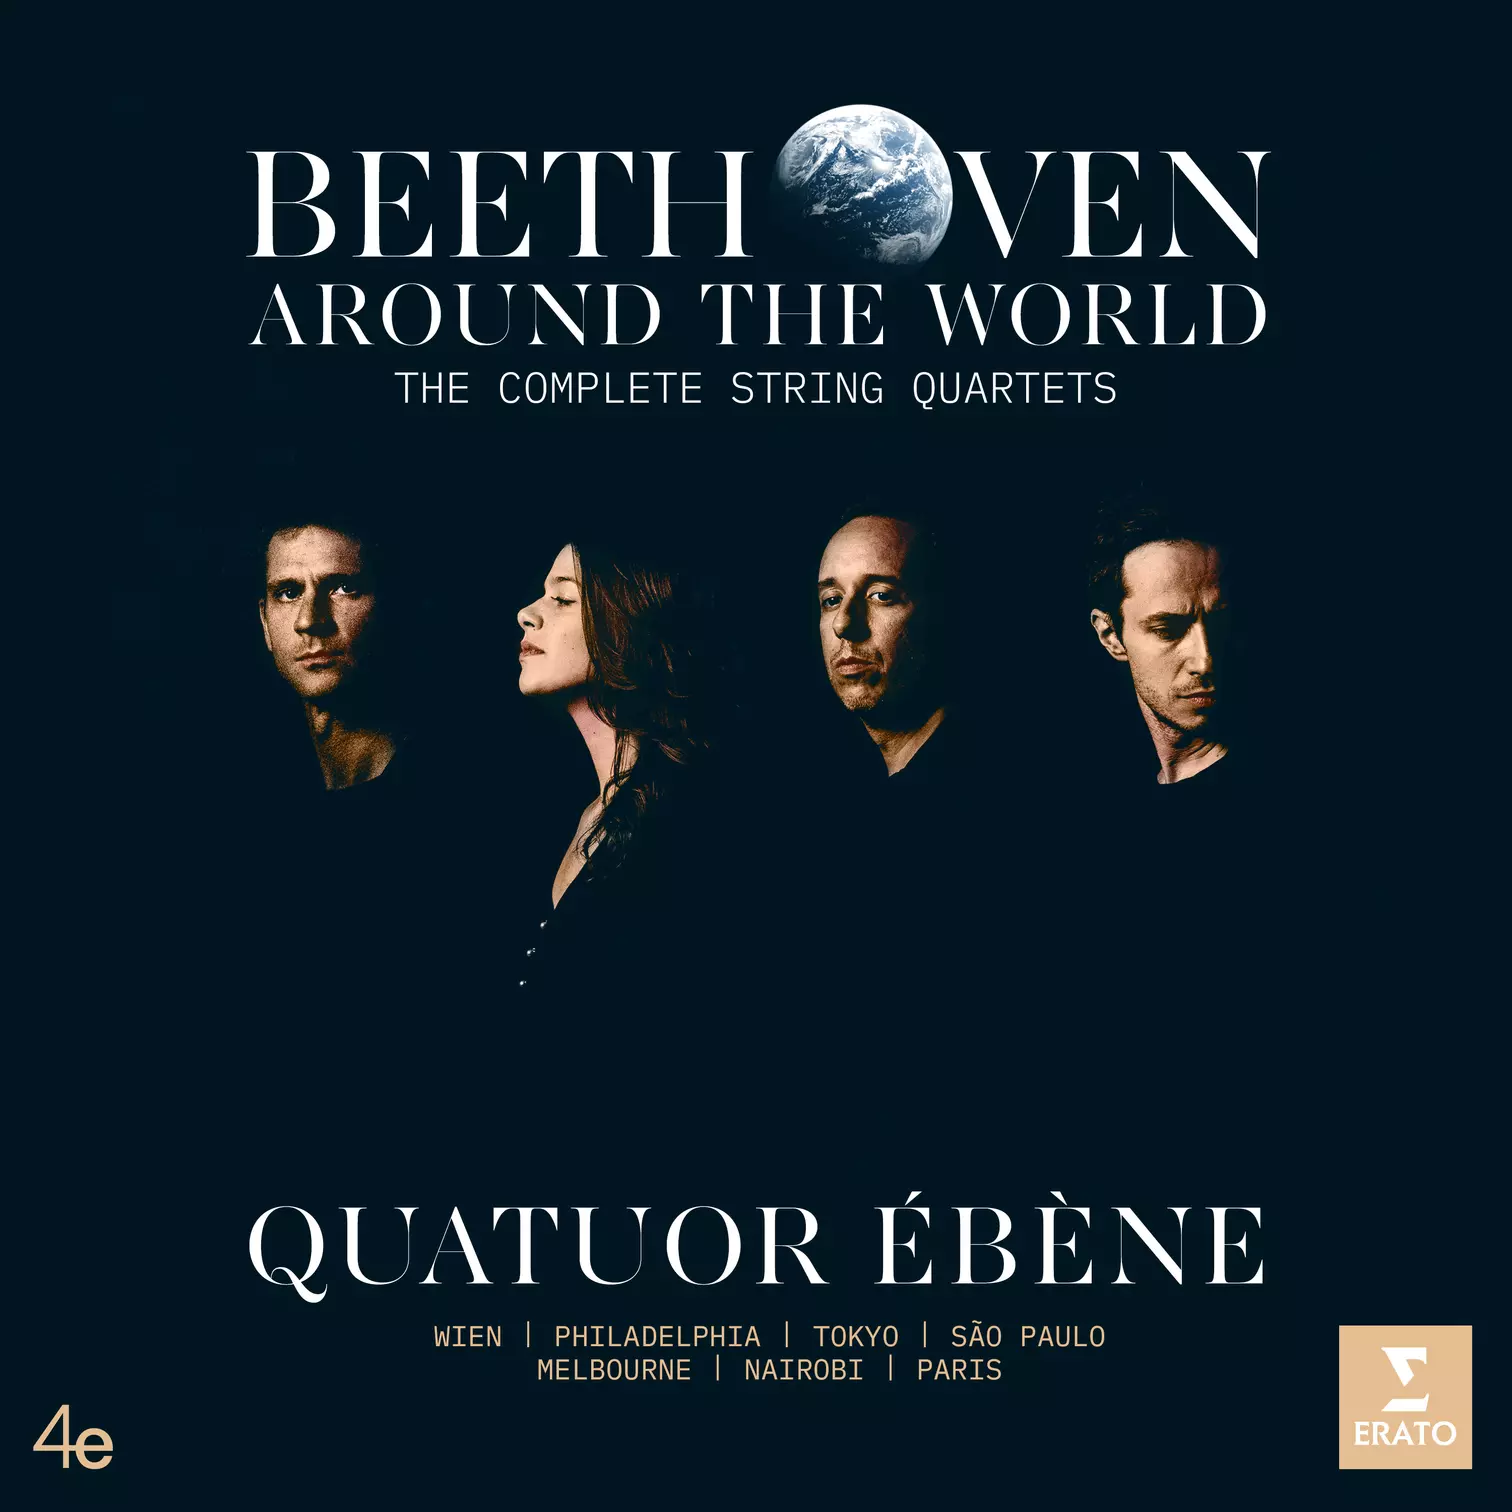 Beethoven Around the World - The Complete String Quartets | Warner 